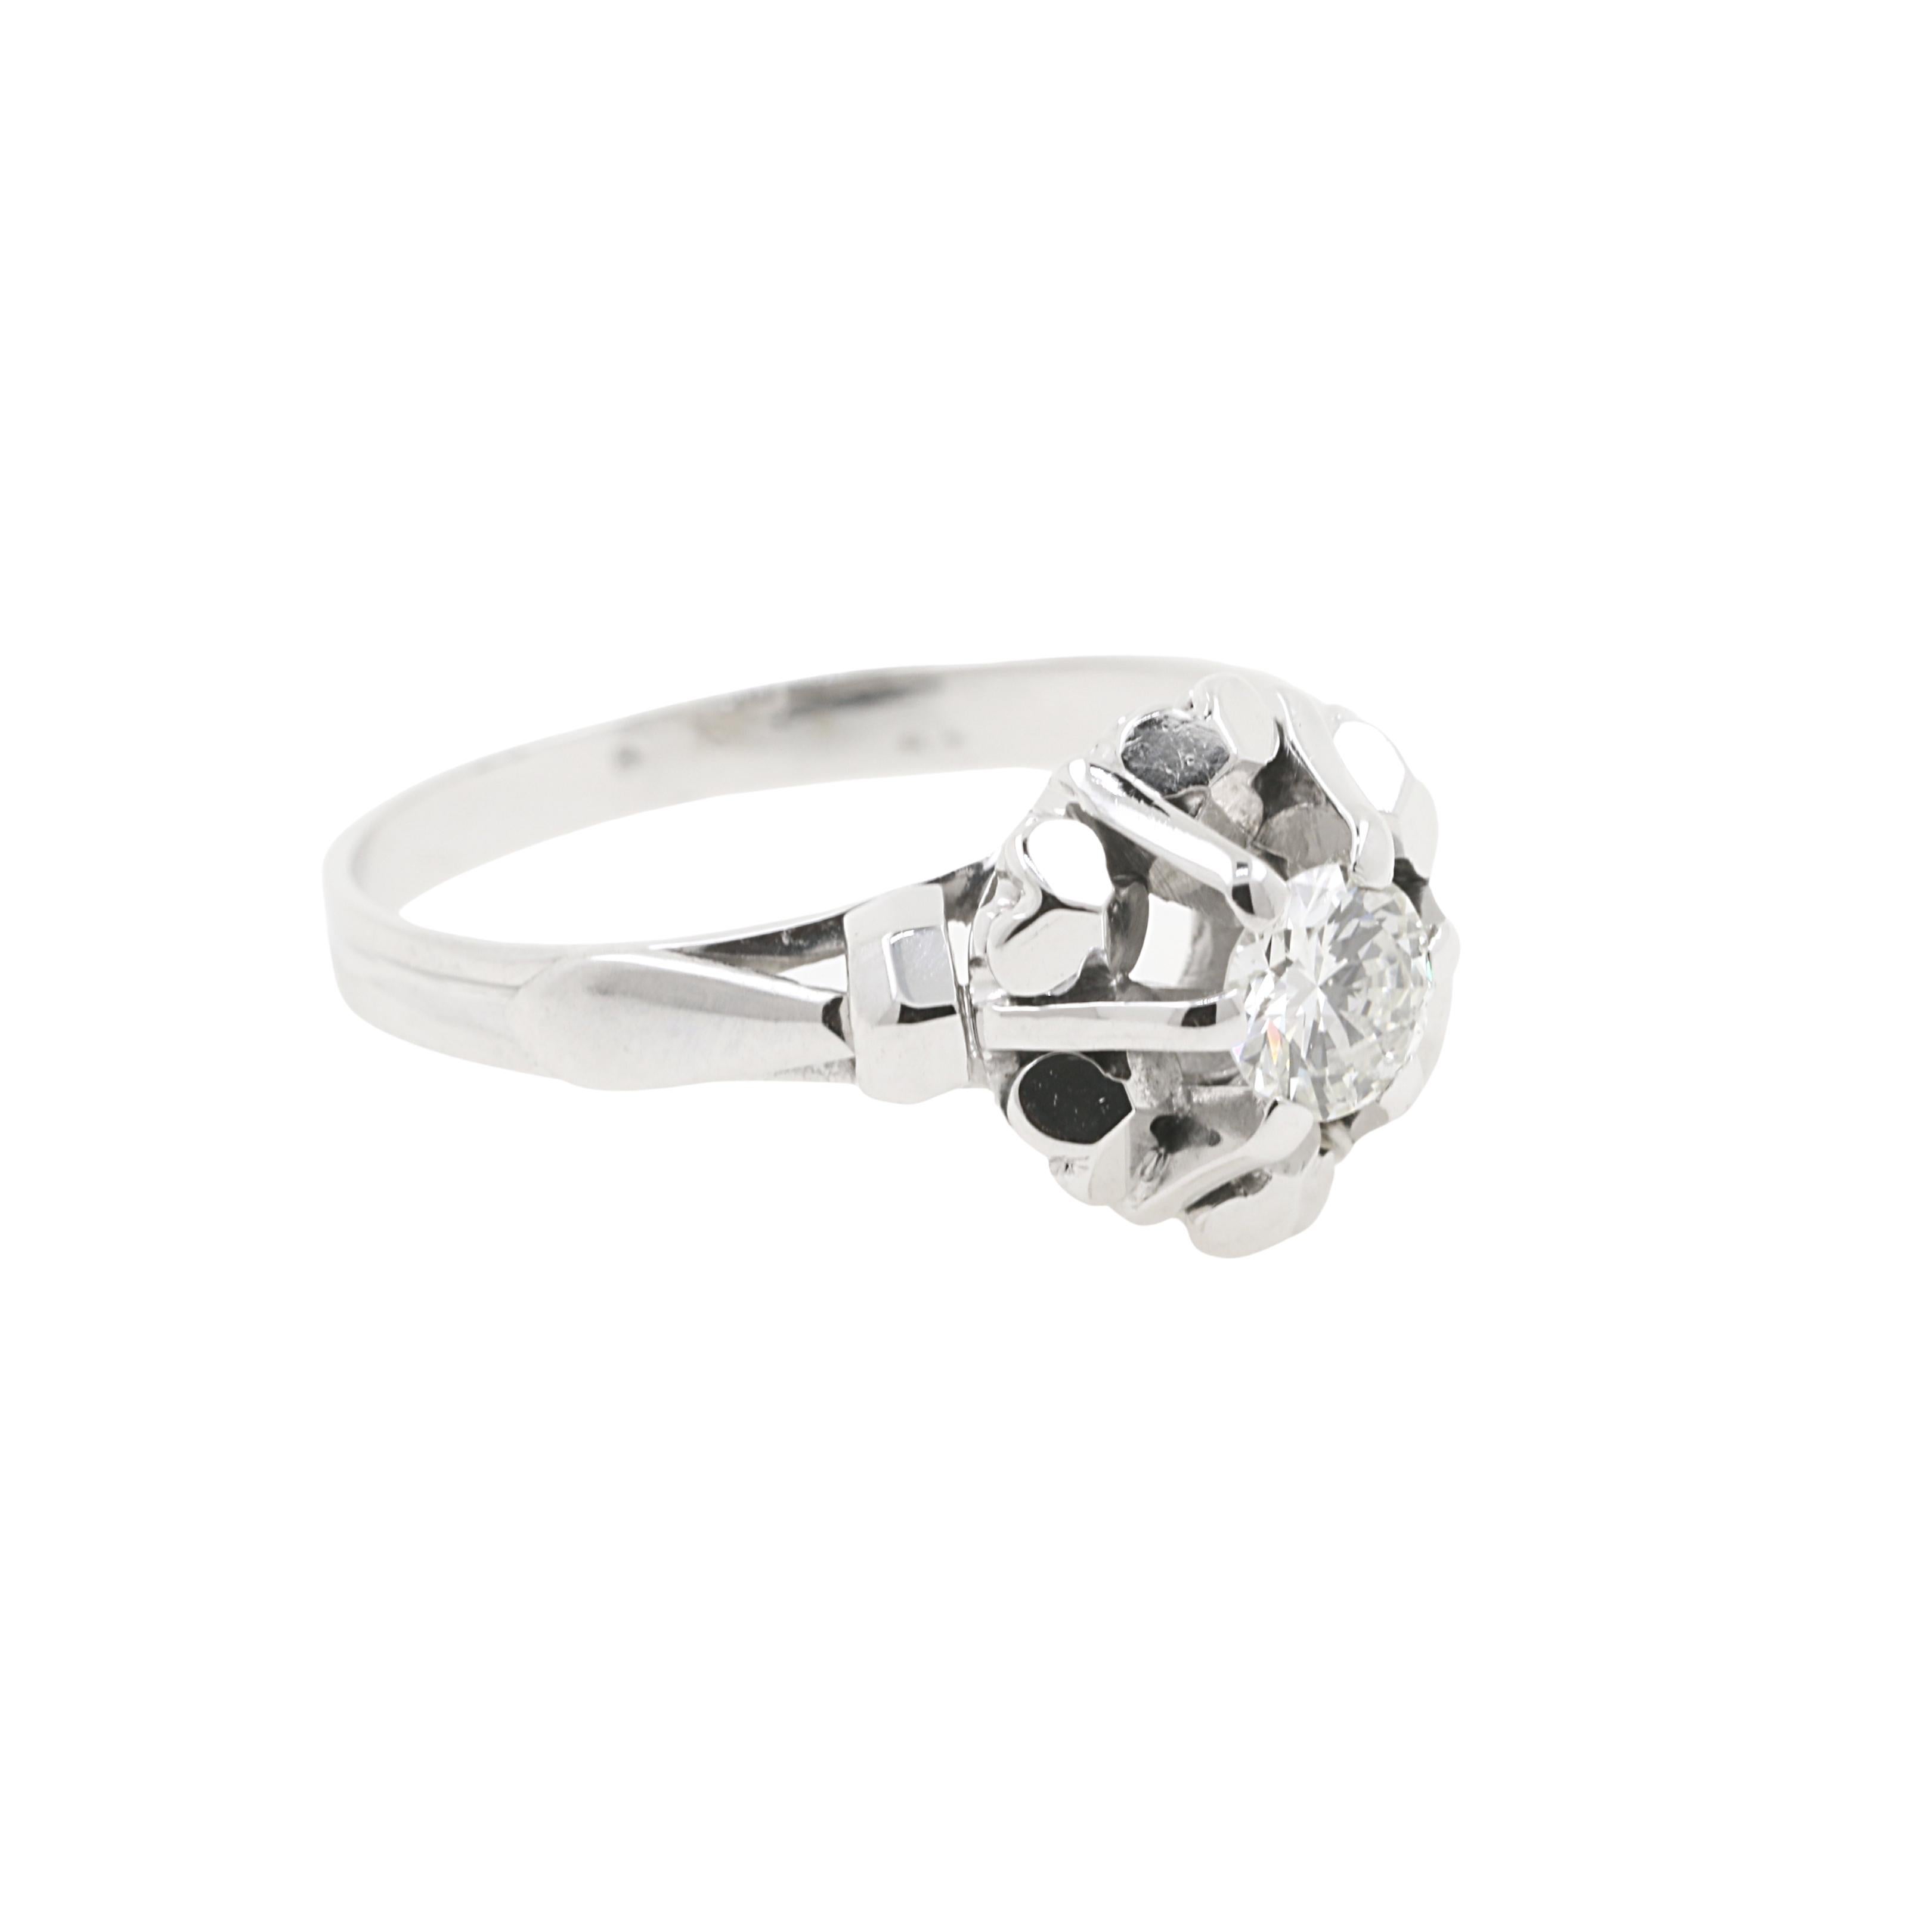 Buy your Engagement ring from romantic Italy and start your most wonderful journey!

Diamond engagement ring on an 18 karat white gold mounting. The creative motive recalls a flower petals, highlighting  the brilliance of the solitaire diamond.
Made